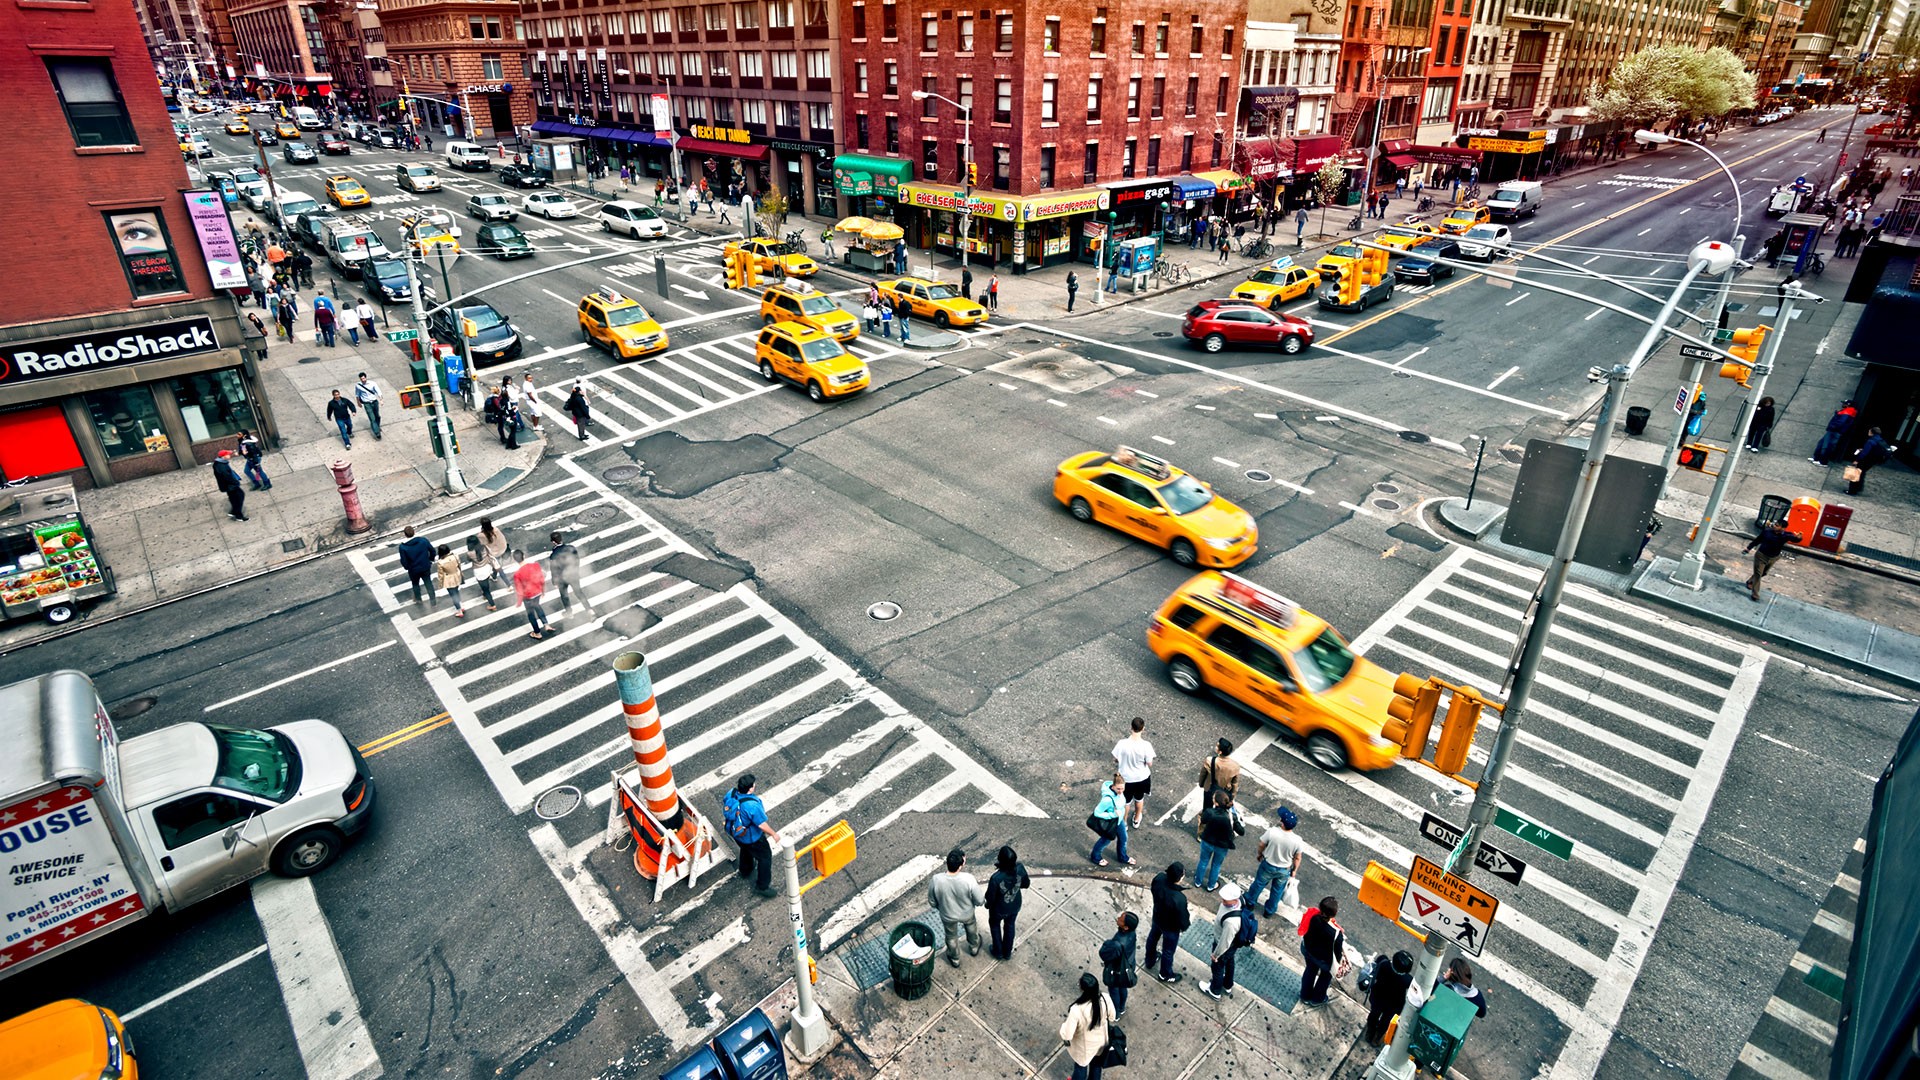 city, Architecture, Cityscape, New York City, USA, Building, Car, Street, Urban, New York Taxi, Taxi, People, Crowds, Crossroads Wallpaper